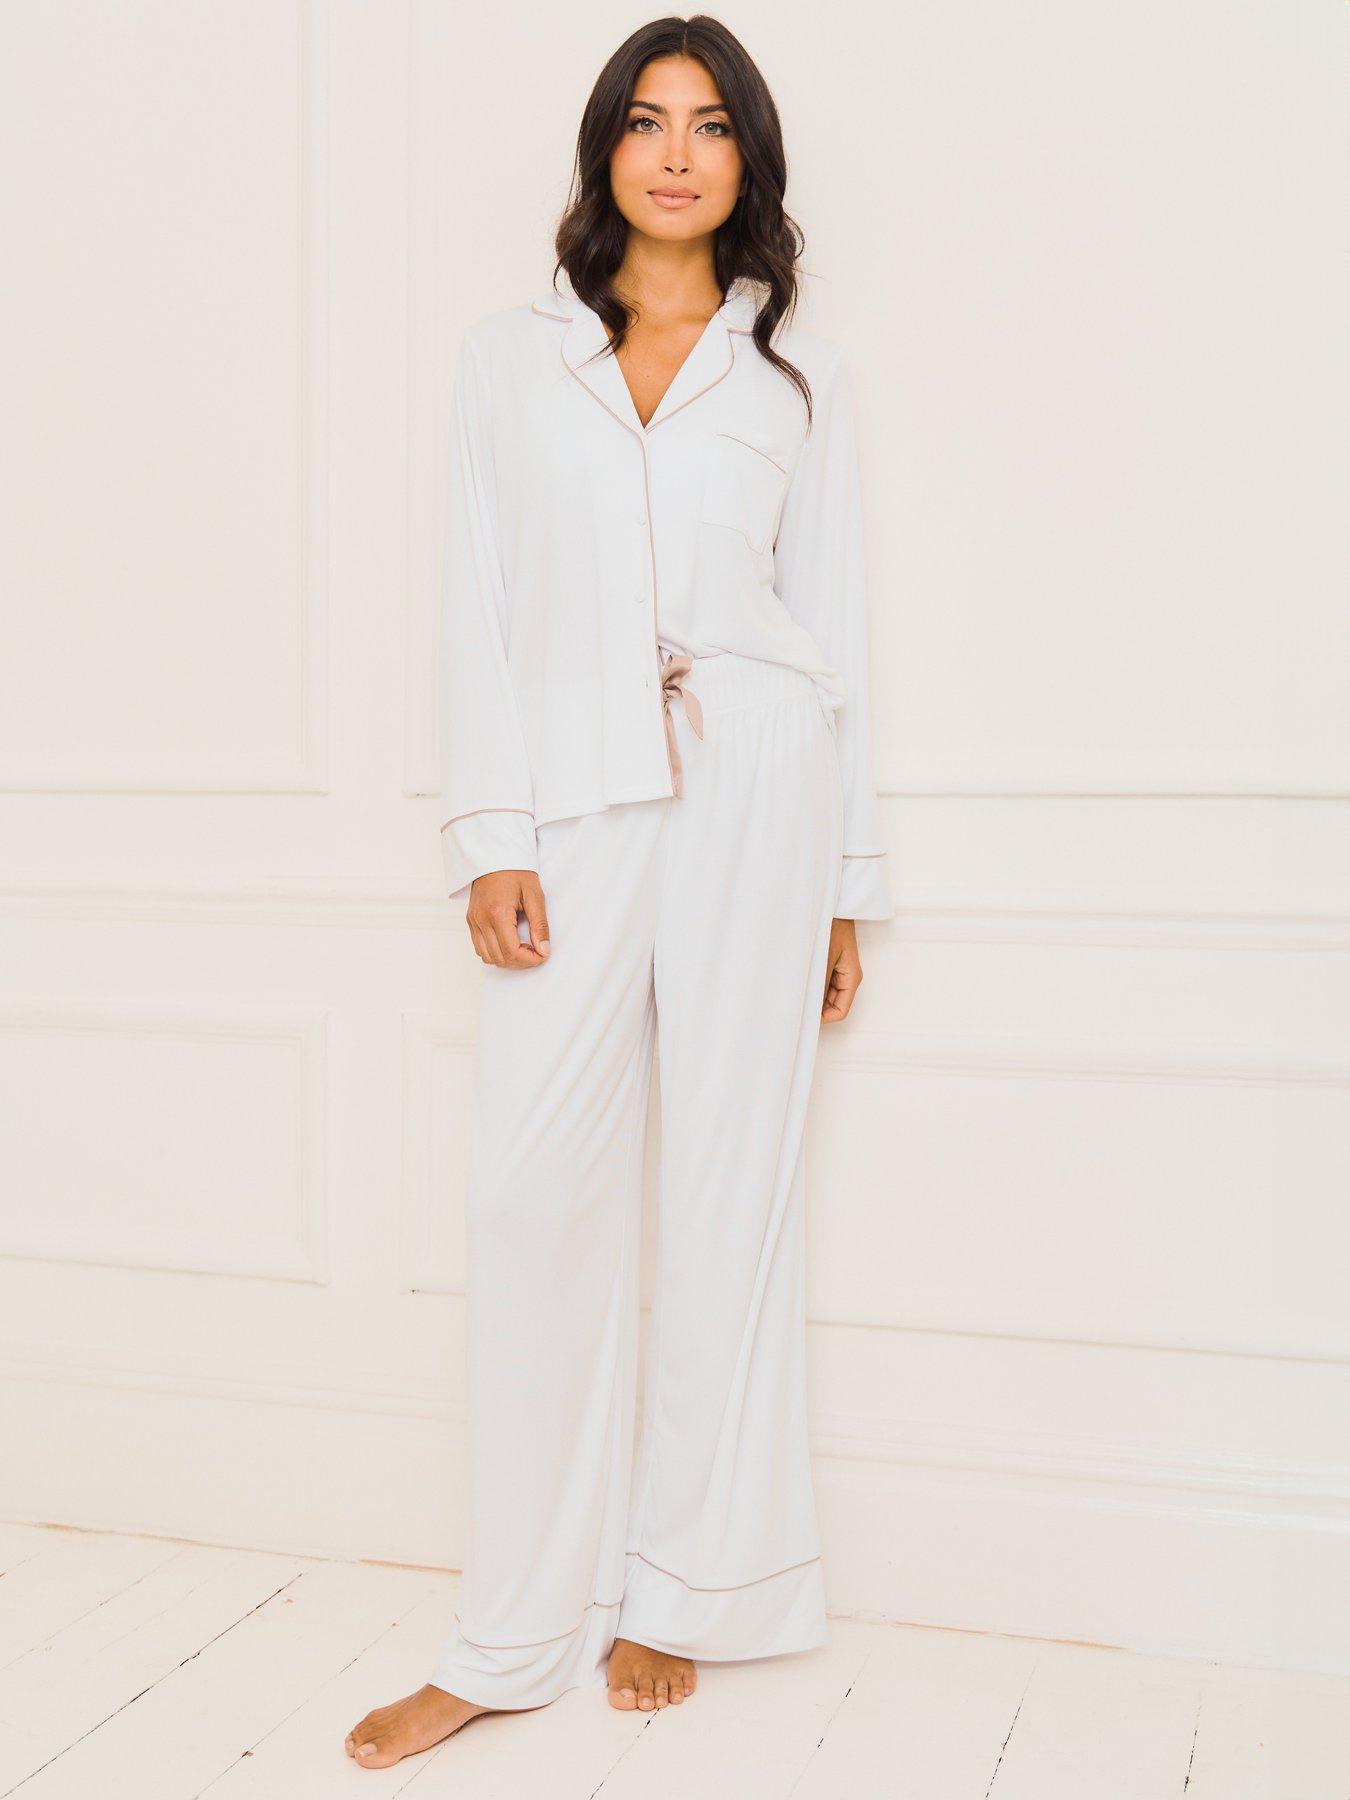 HUGO - Relaxed-fit satin pajamas with contrast piping